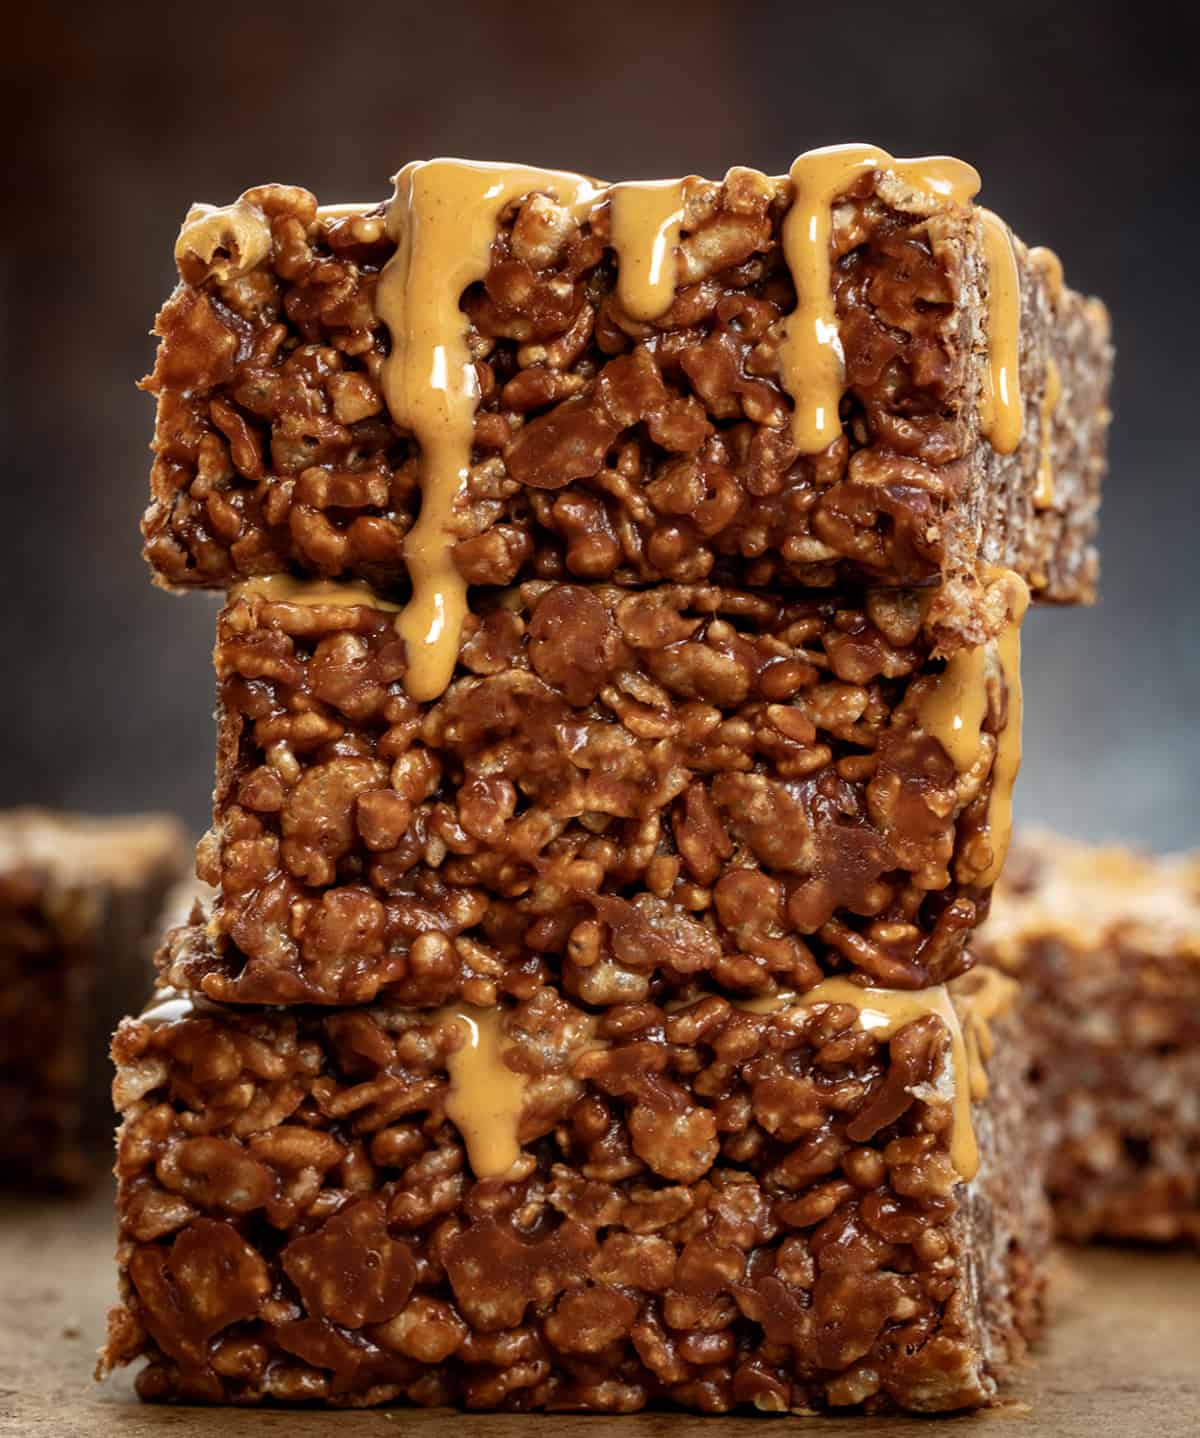 Stack of Chocolate Peanut Butter Rice Krispie Bars on a wooden table surrounded by other bars.